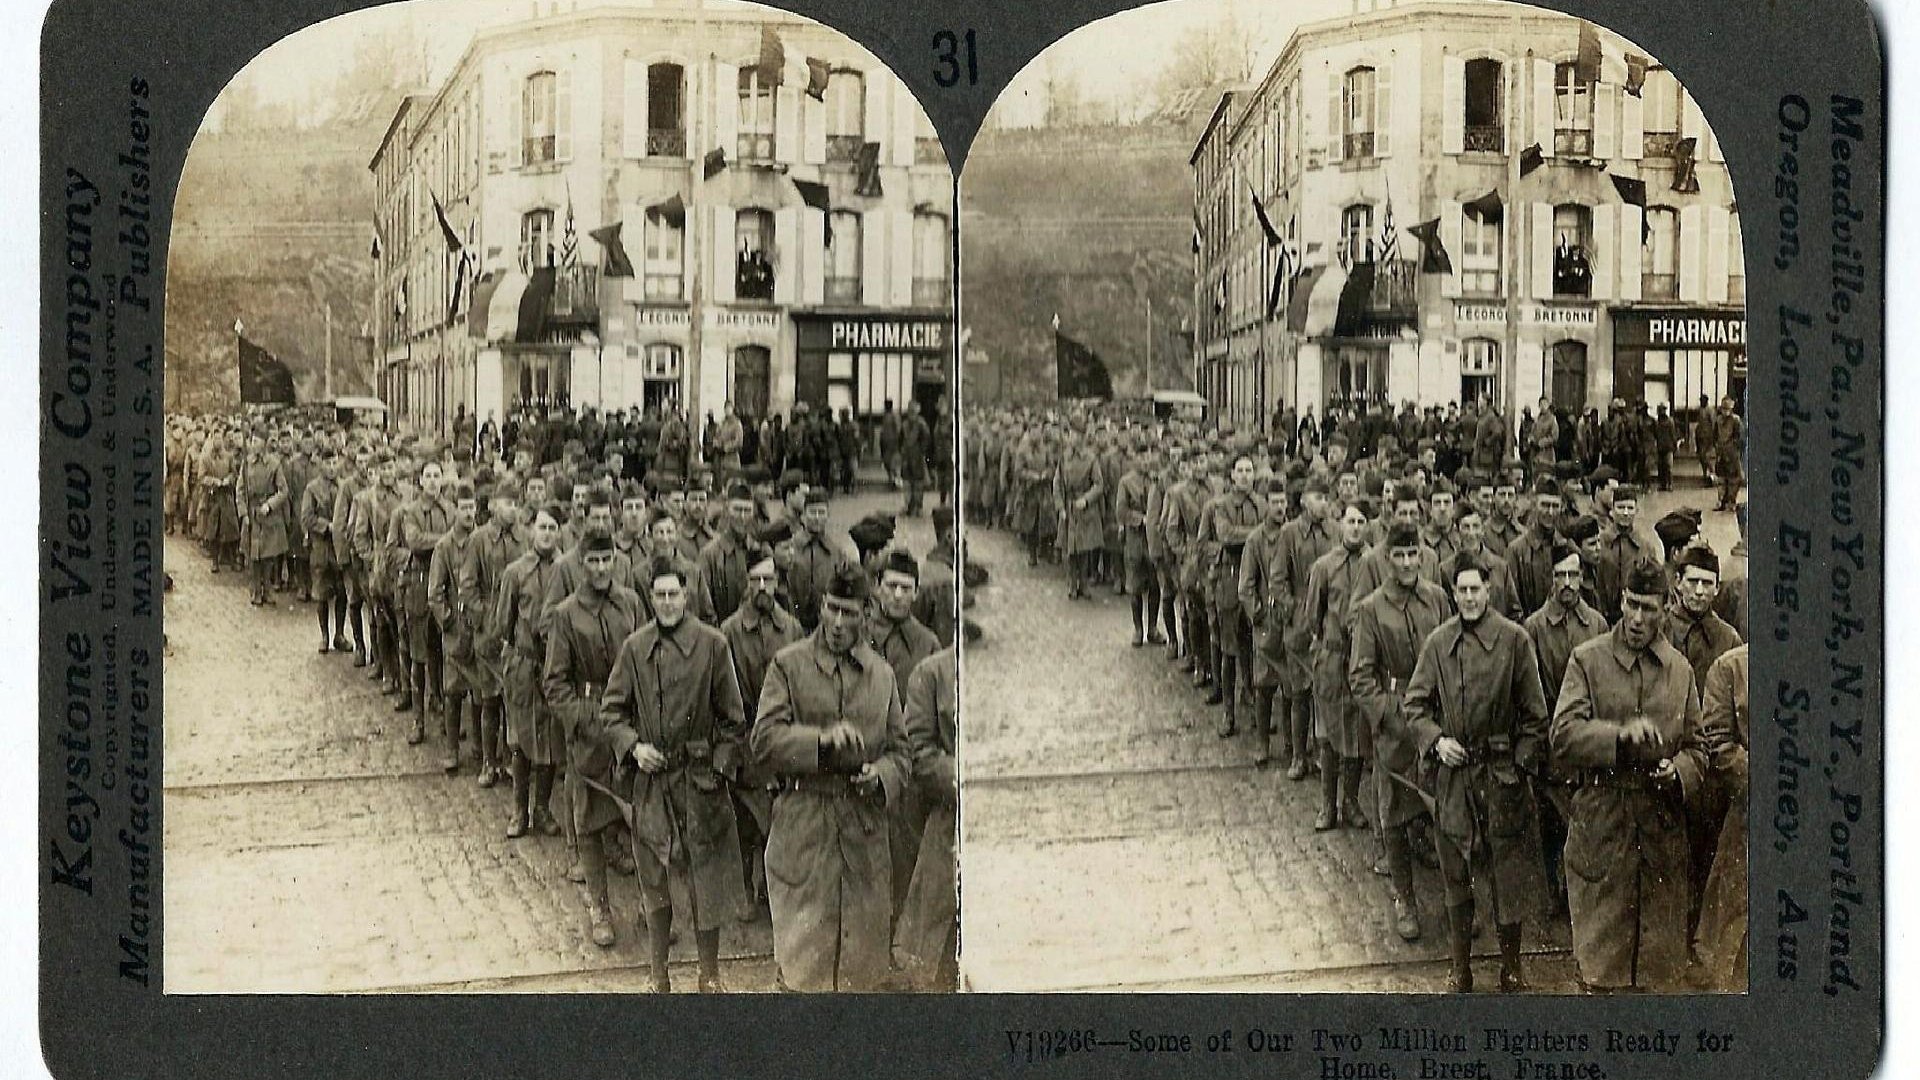 Photo in sepia colours of soldiers standing in rows on a cobbled street. A building in the background.